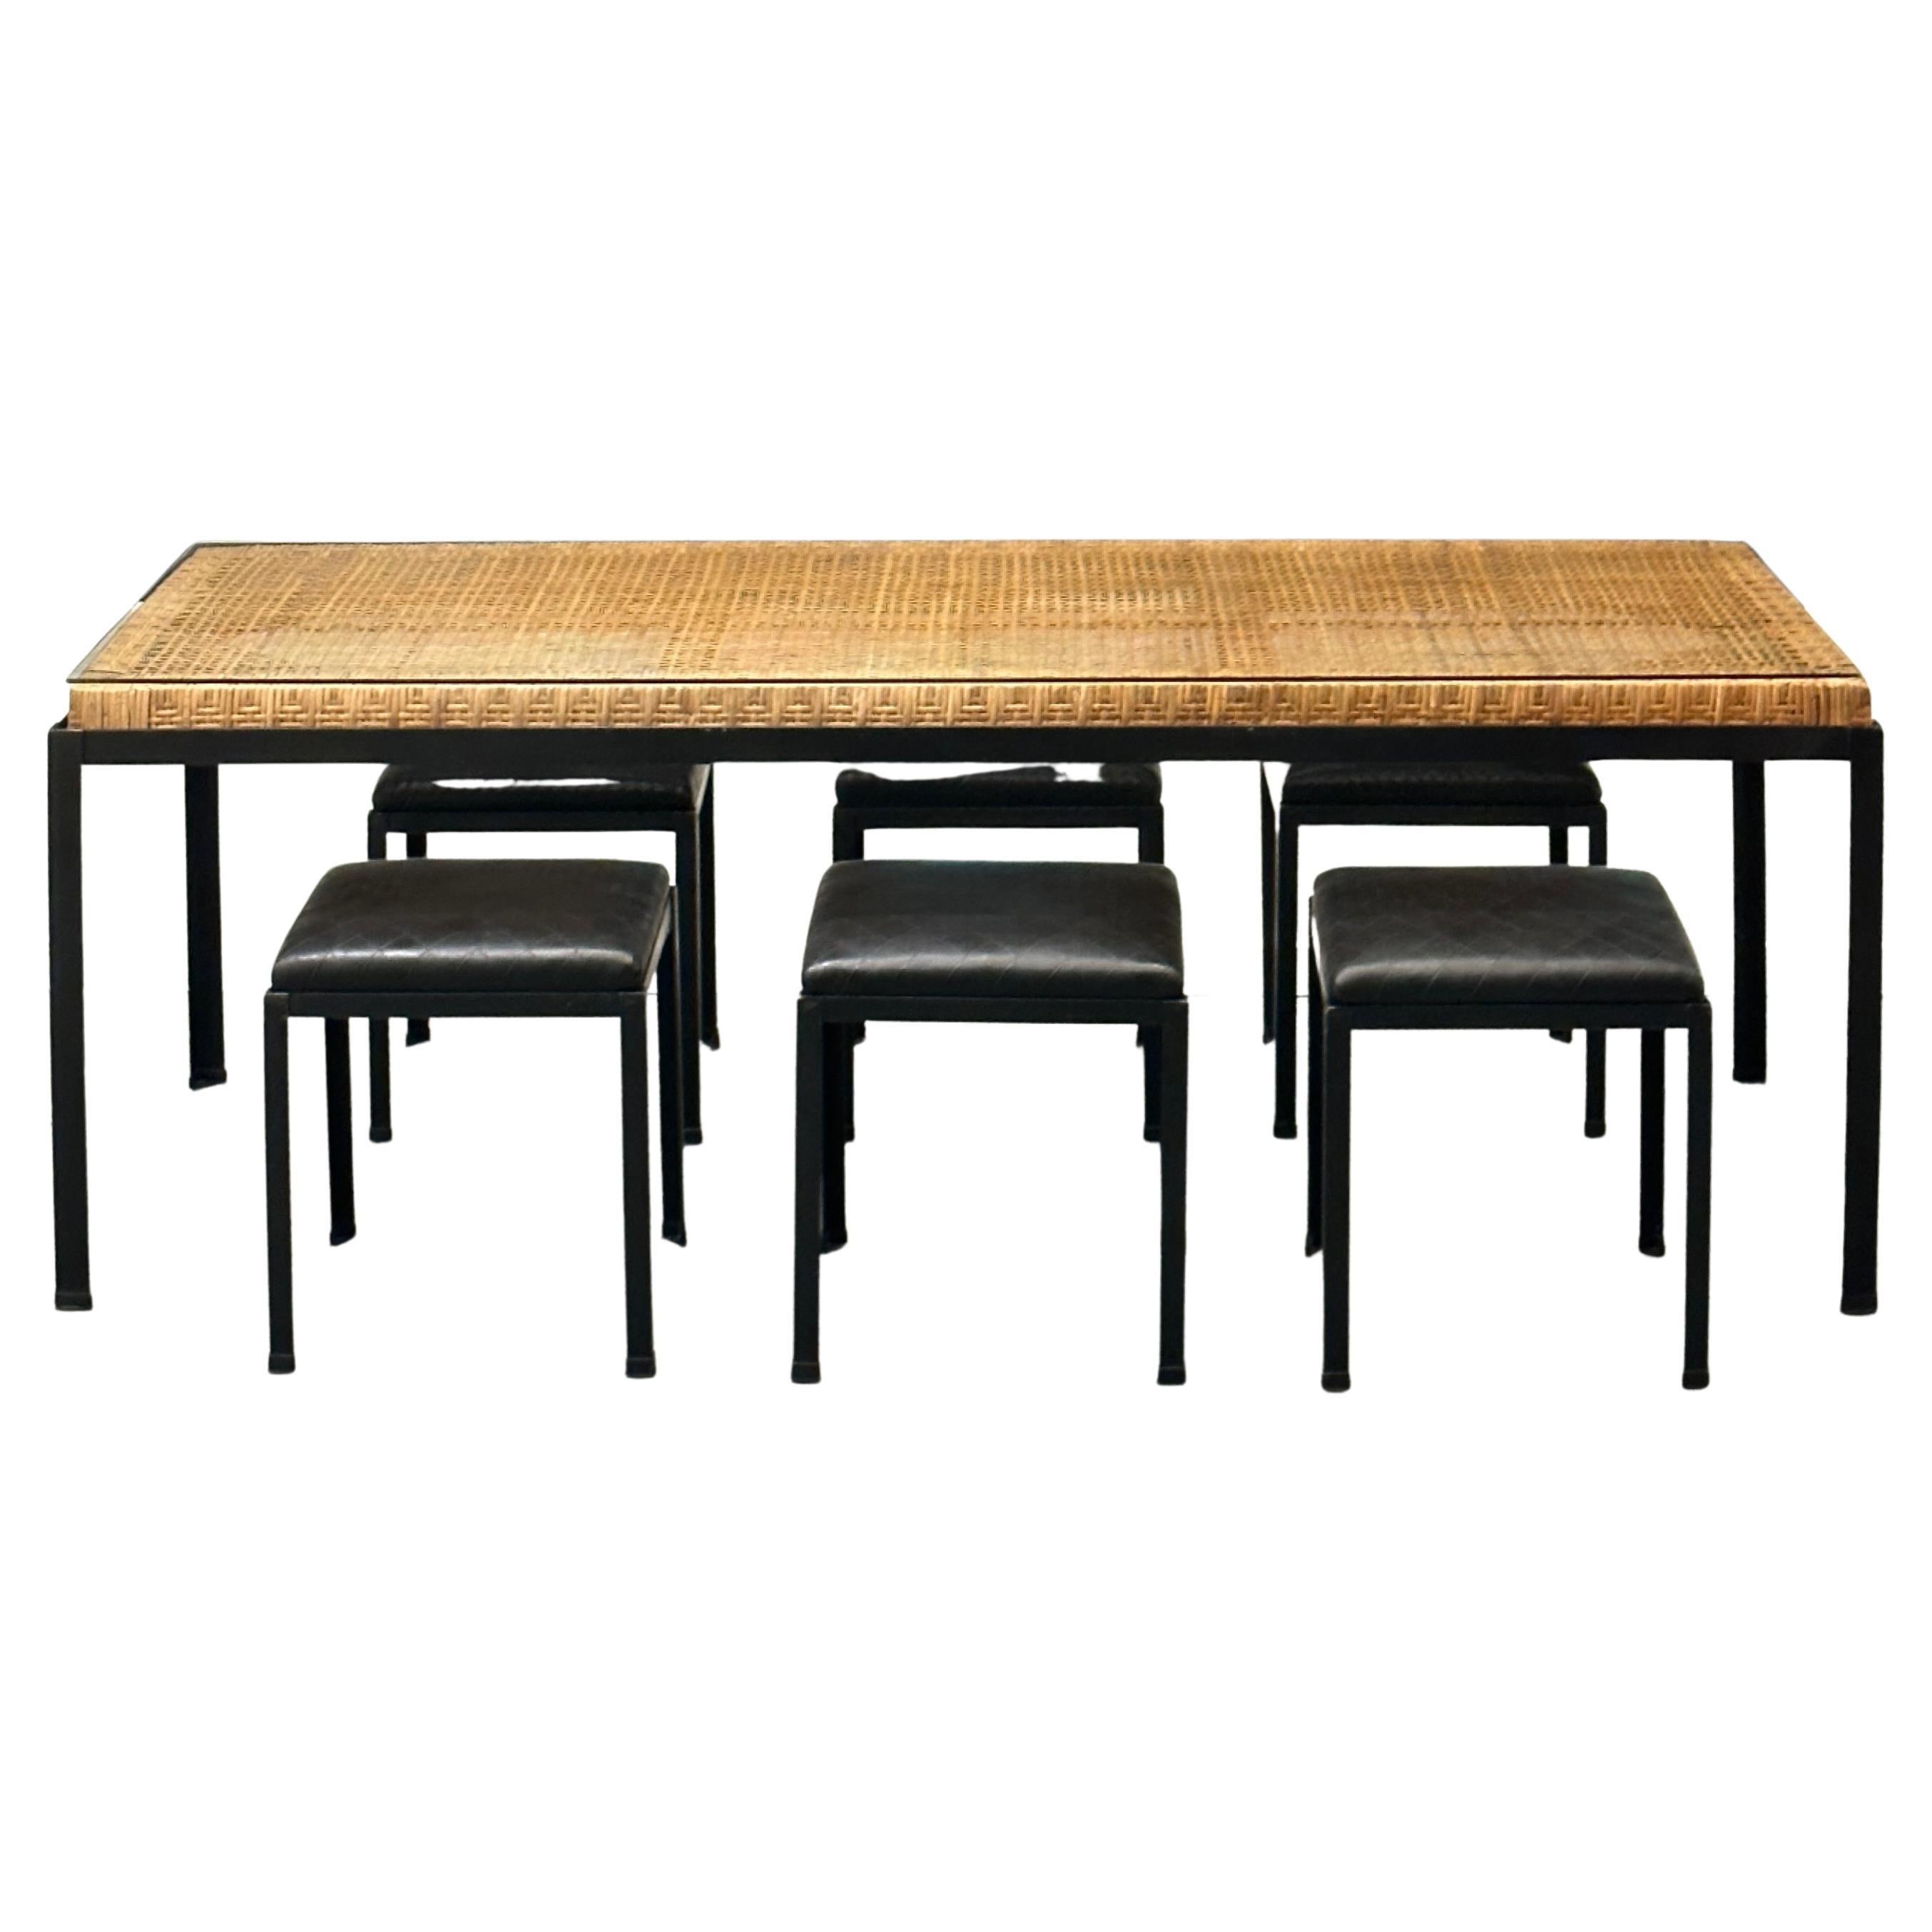 Danny Ho Fong for Tropi-Cal Wicker and Iron Dining Table and Chairs, ca 1960s For Sale